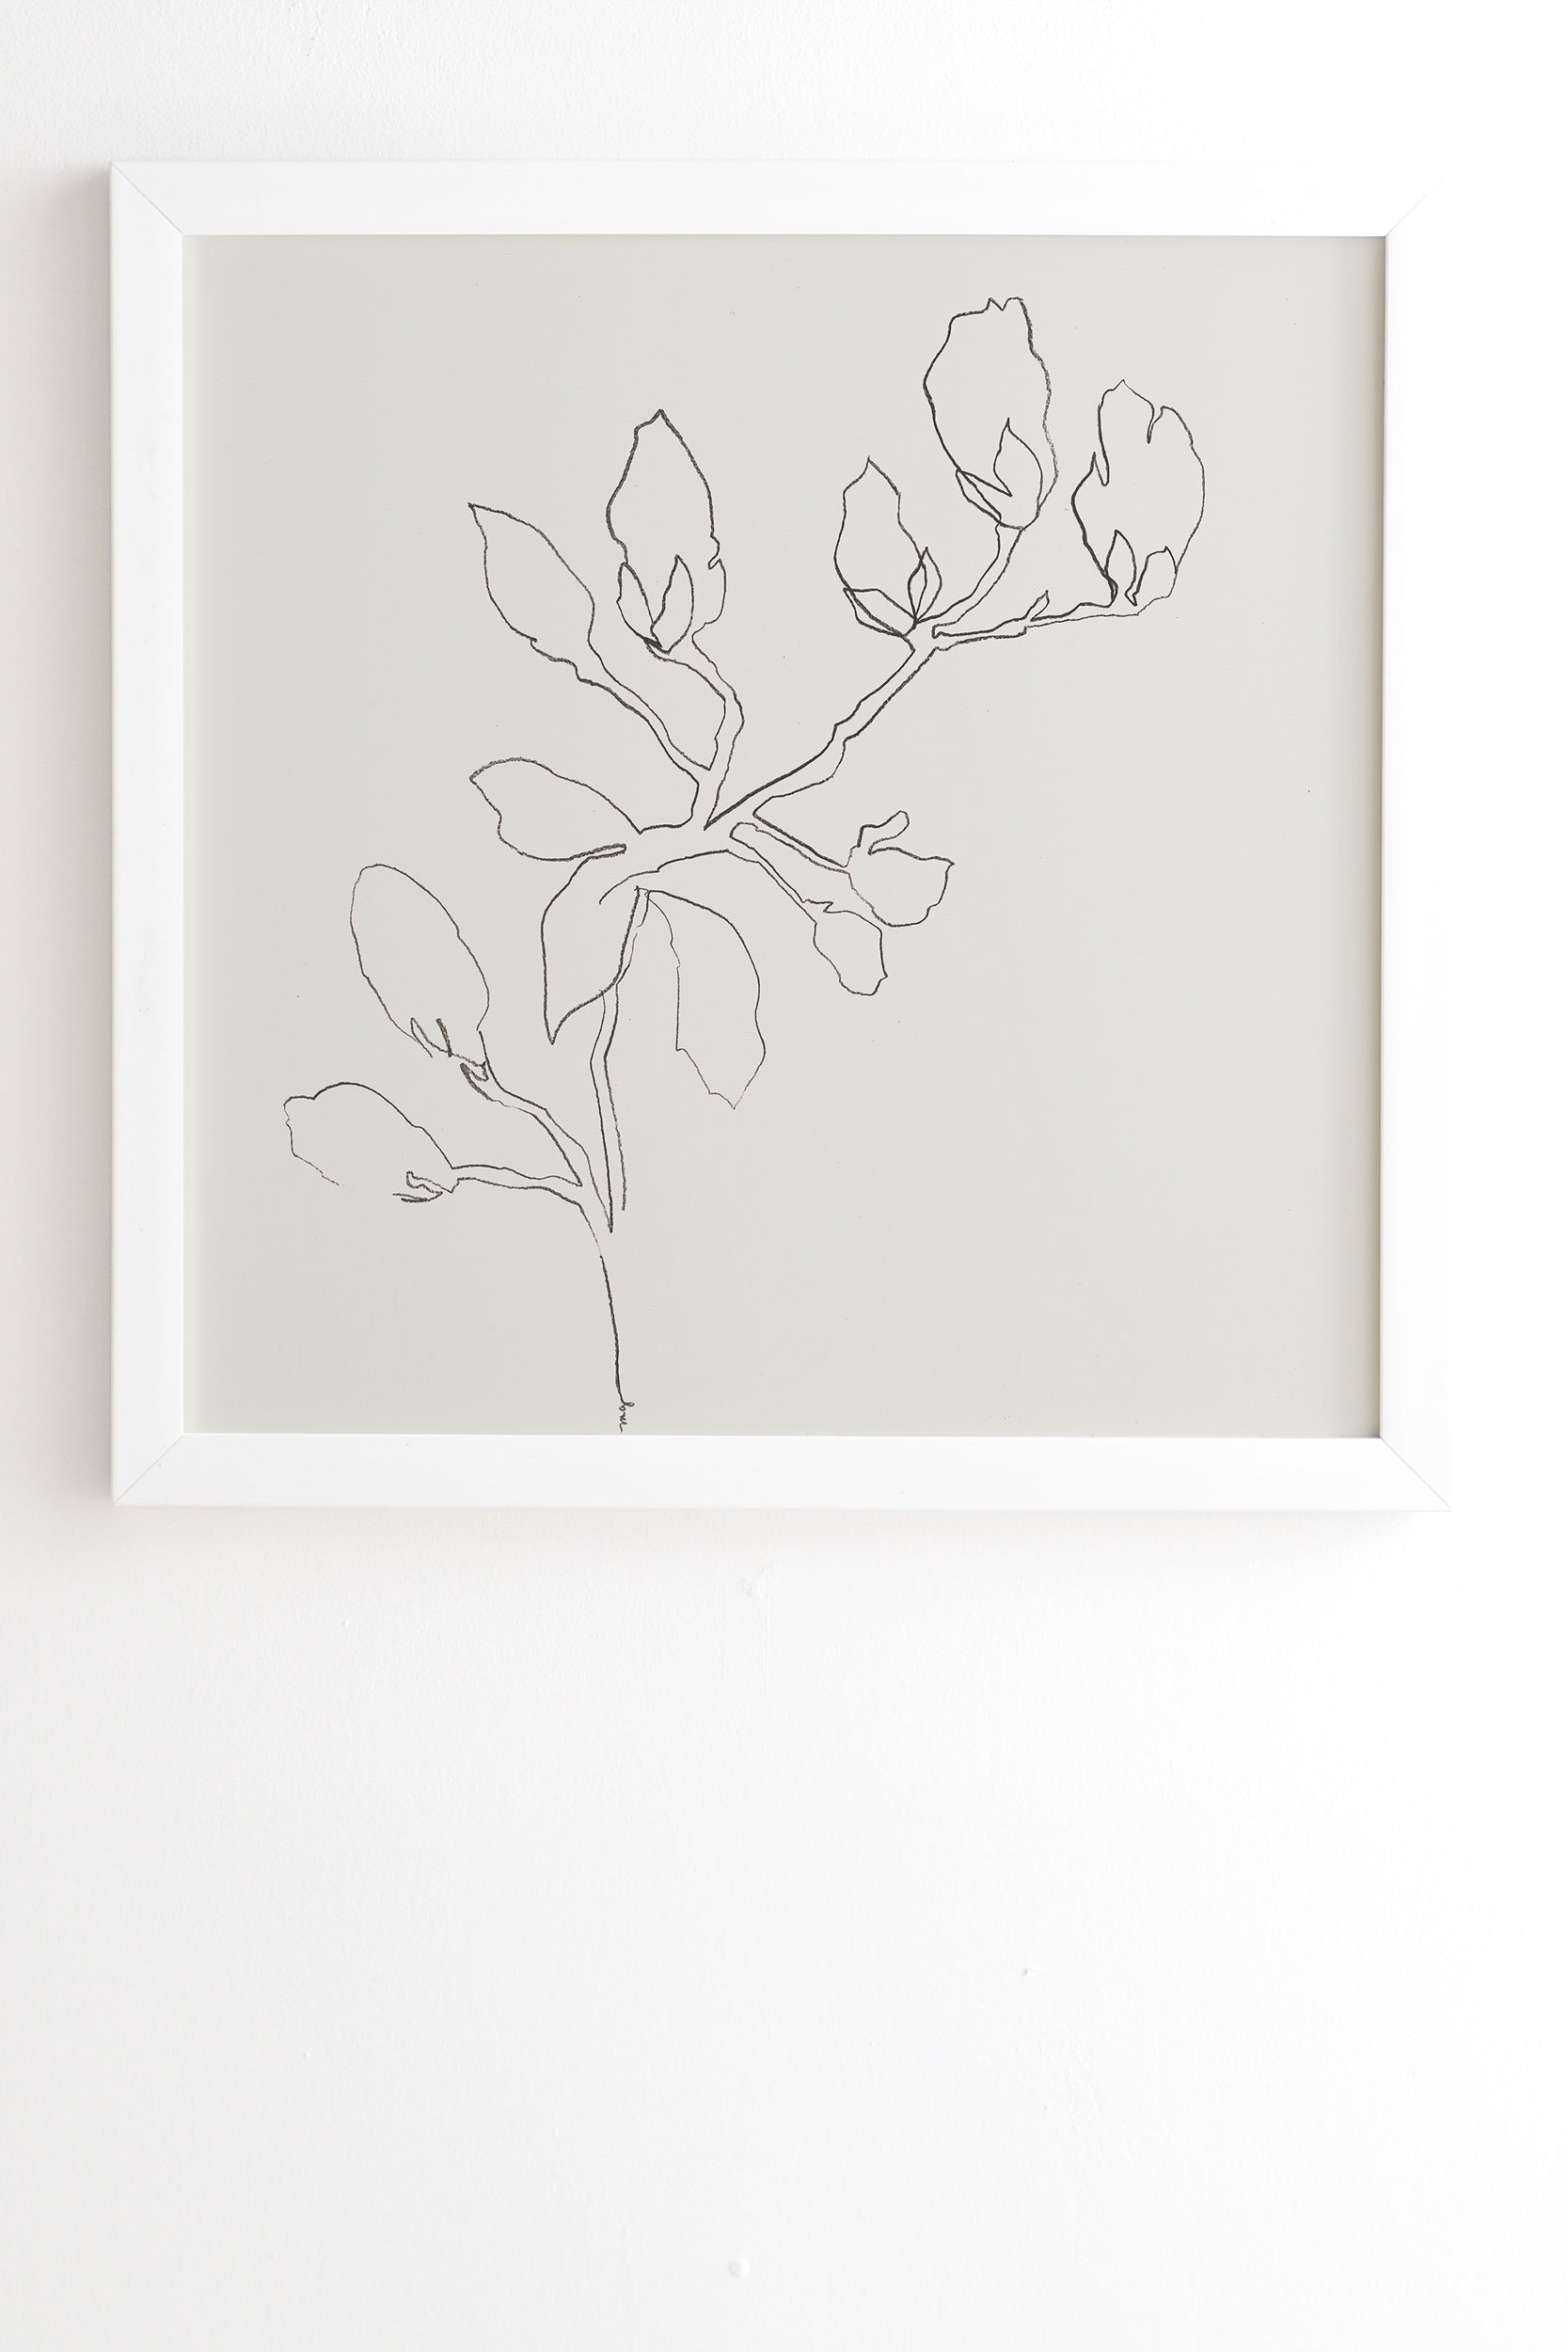 Floral Study No 3 by Megan Galante - Framed Wall Art Basic White 12" x 12" - Image 1